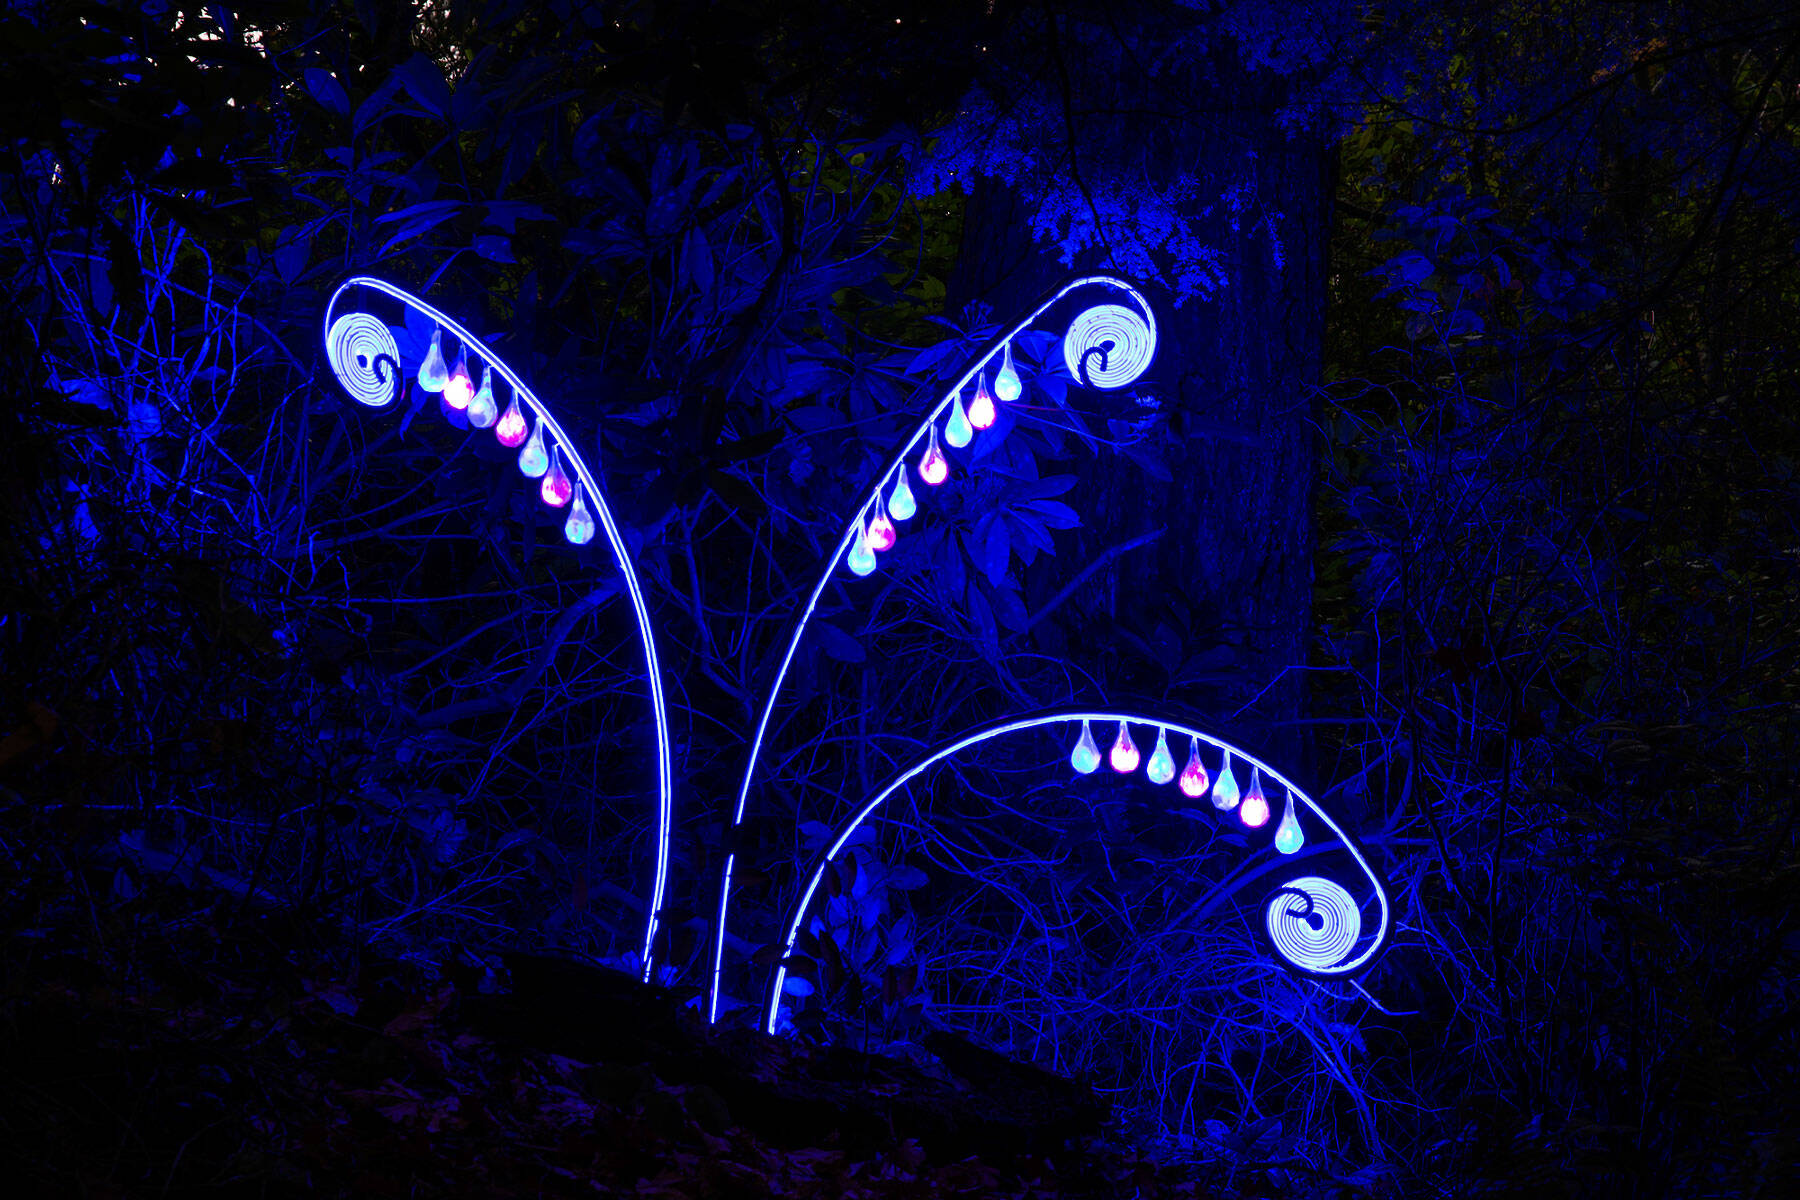 “Emergent Dreams” by Tracy Beals, is light art that was displayed in 2021.